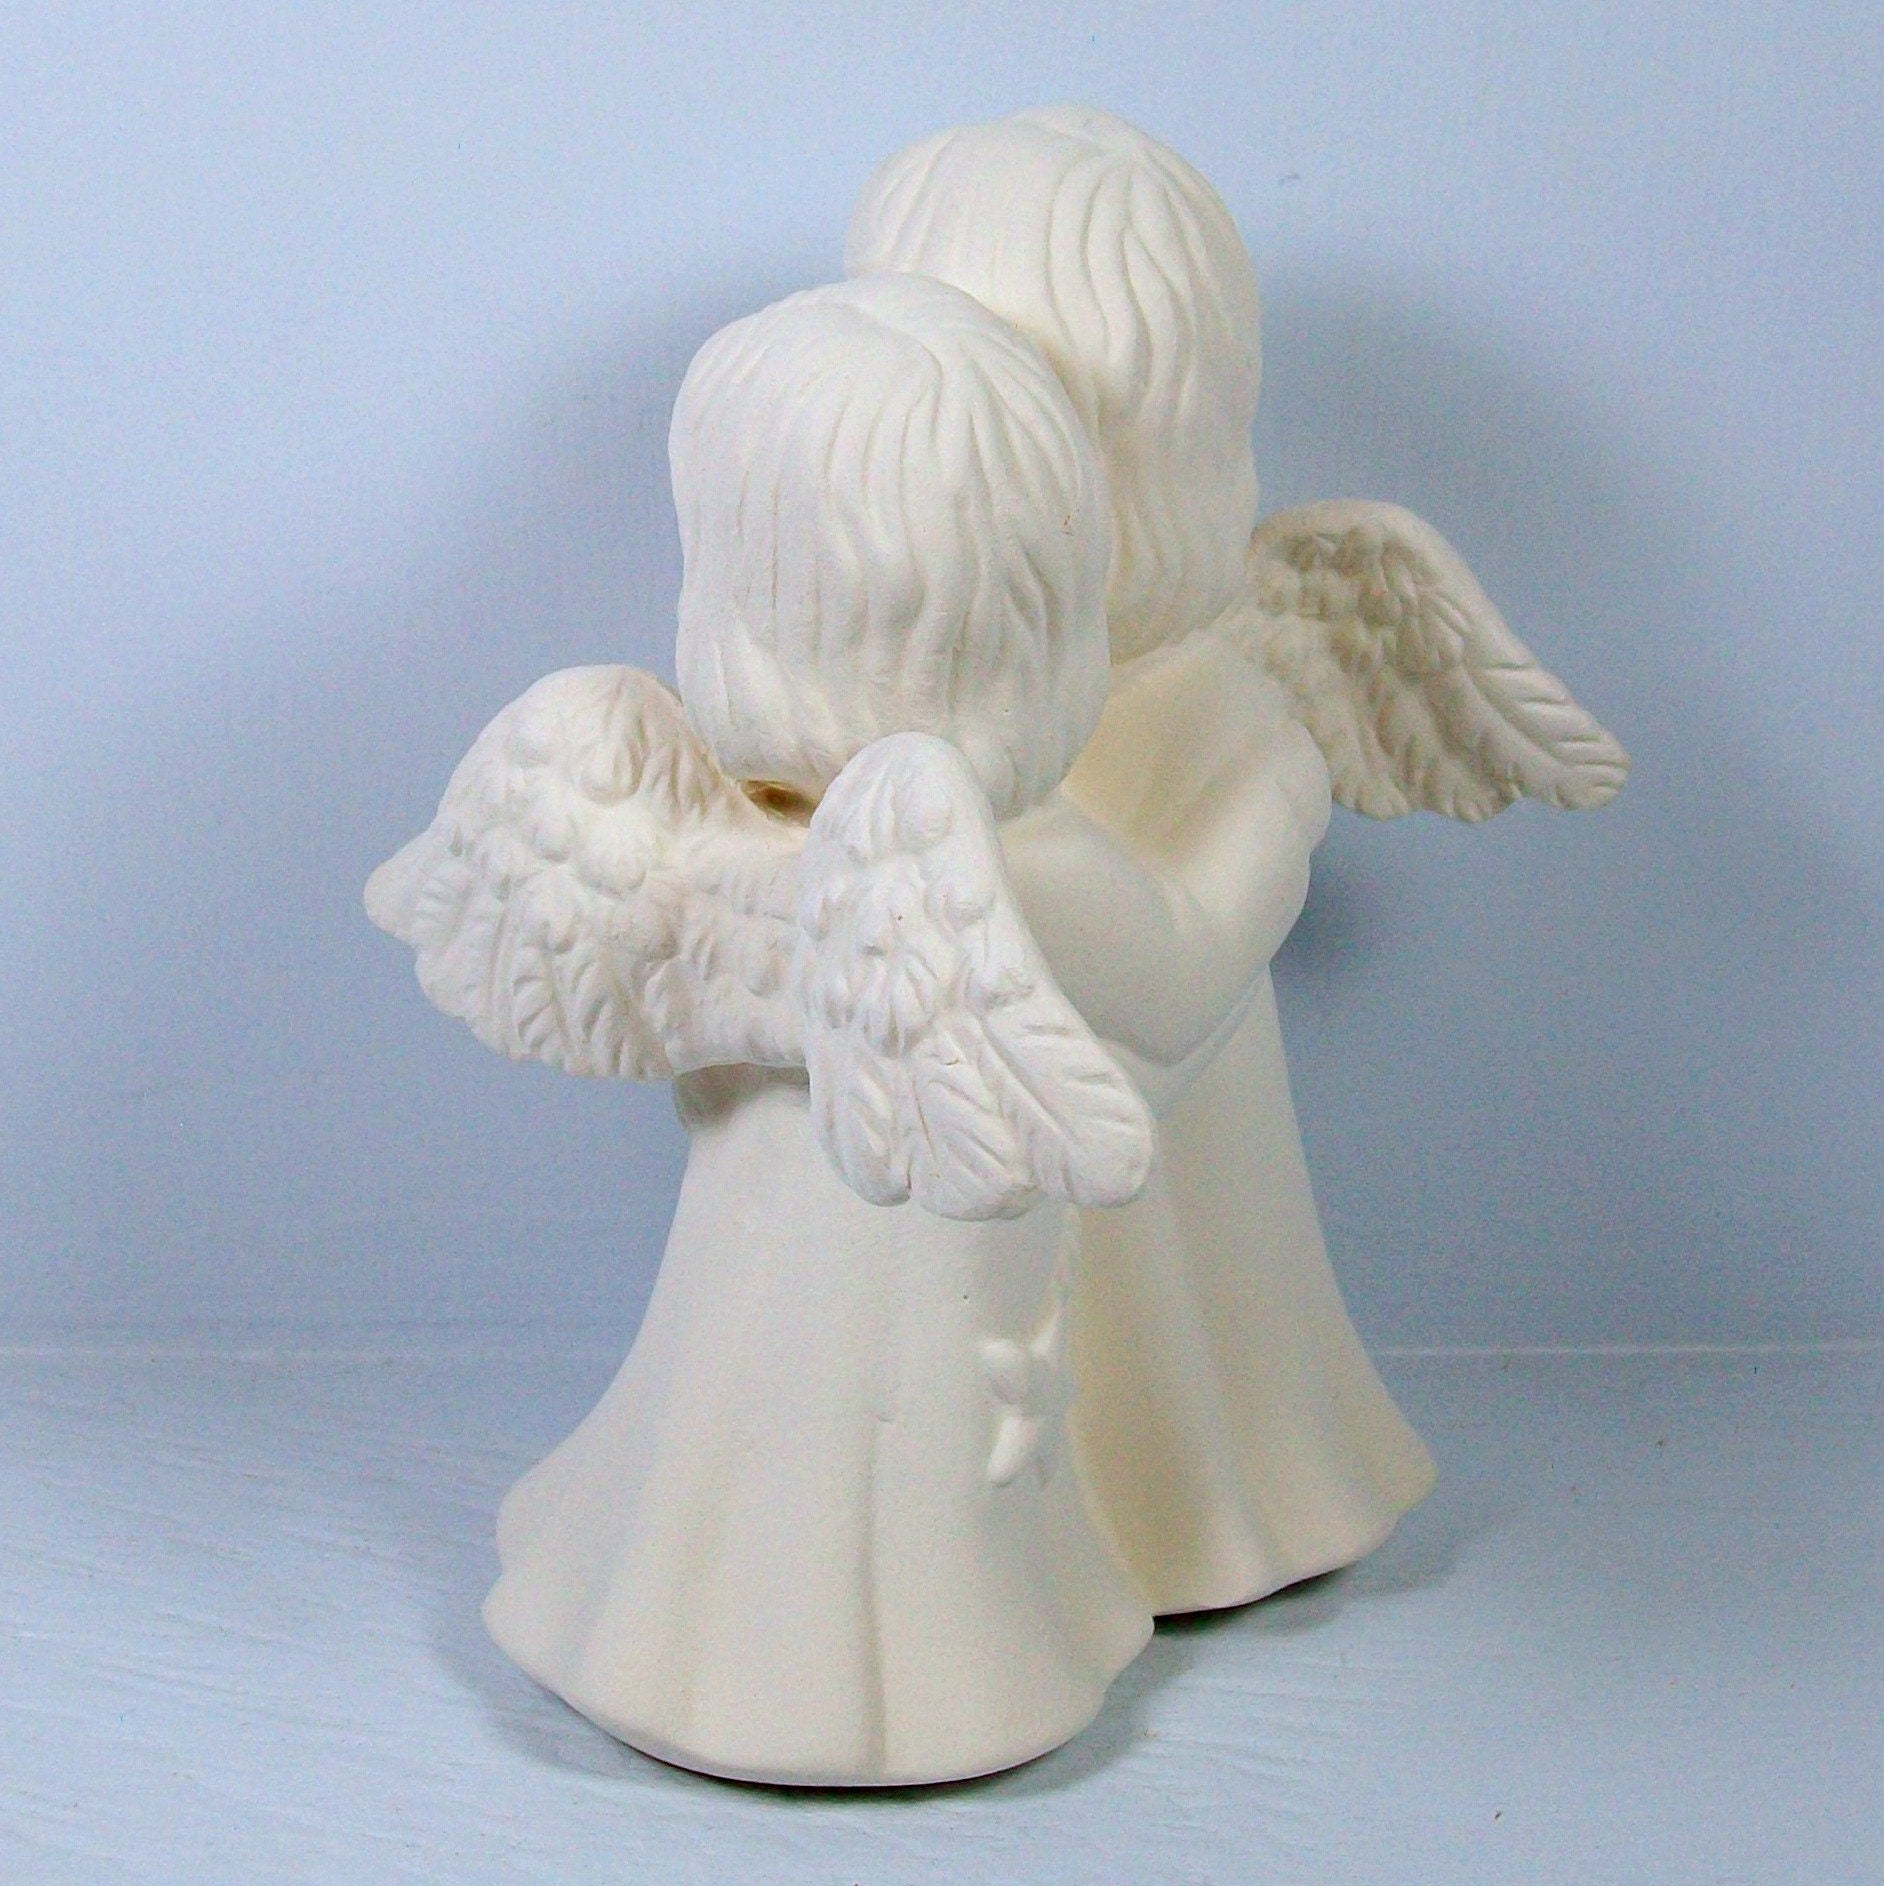 View showing back of smaller paintable ceramic angel figurine